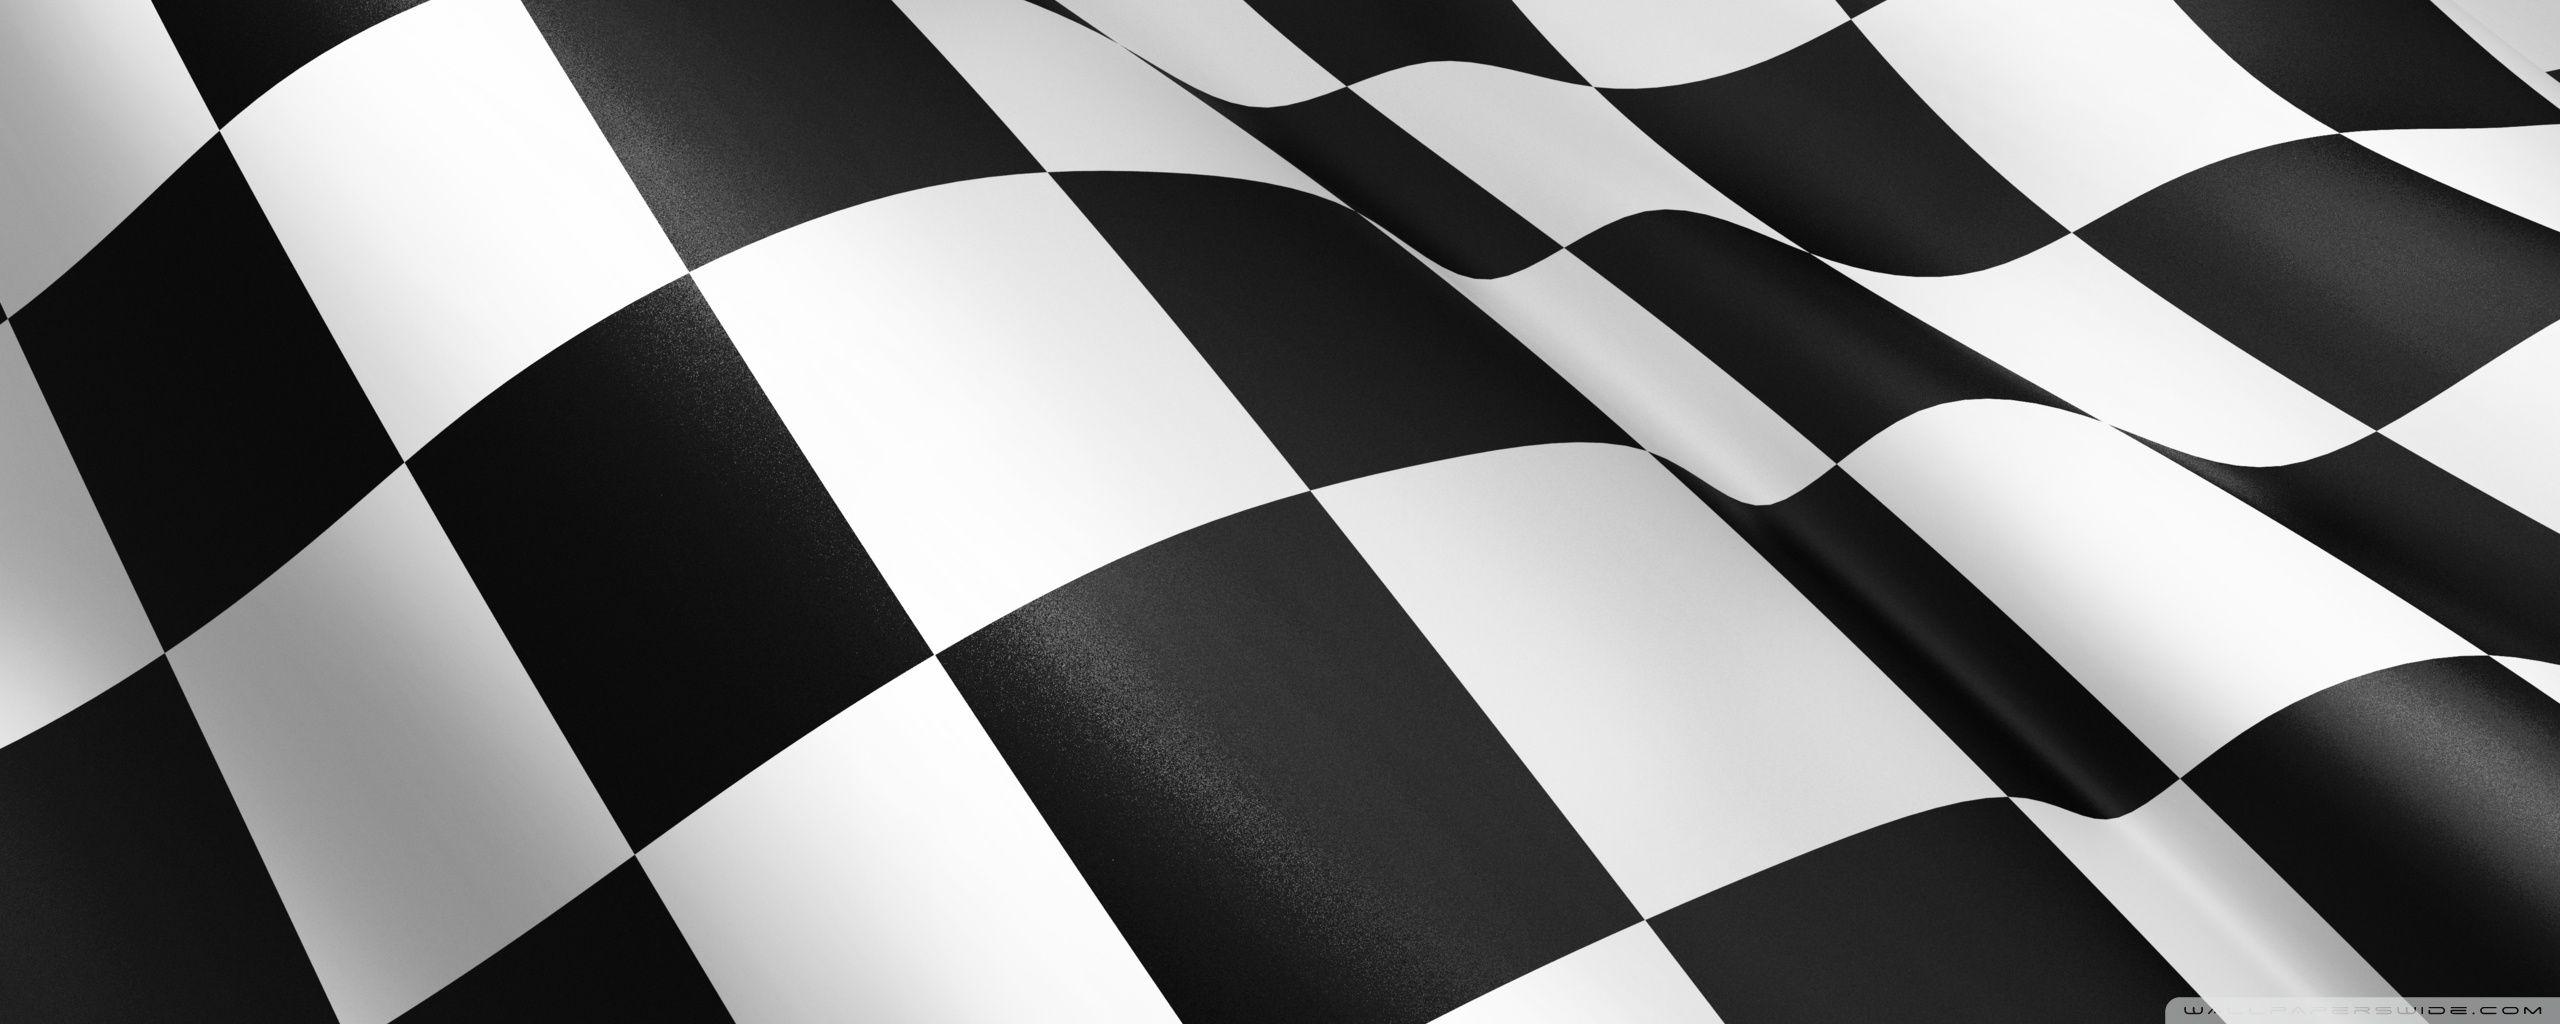 Racing Race Checkered Flag Background royalty free illustration  Flag  coloring pages Checkered flag Flag background